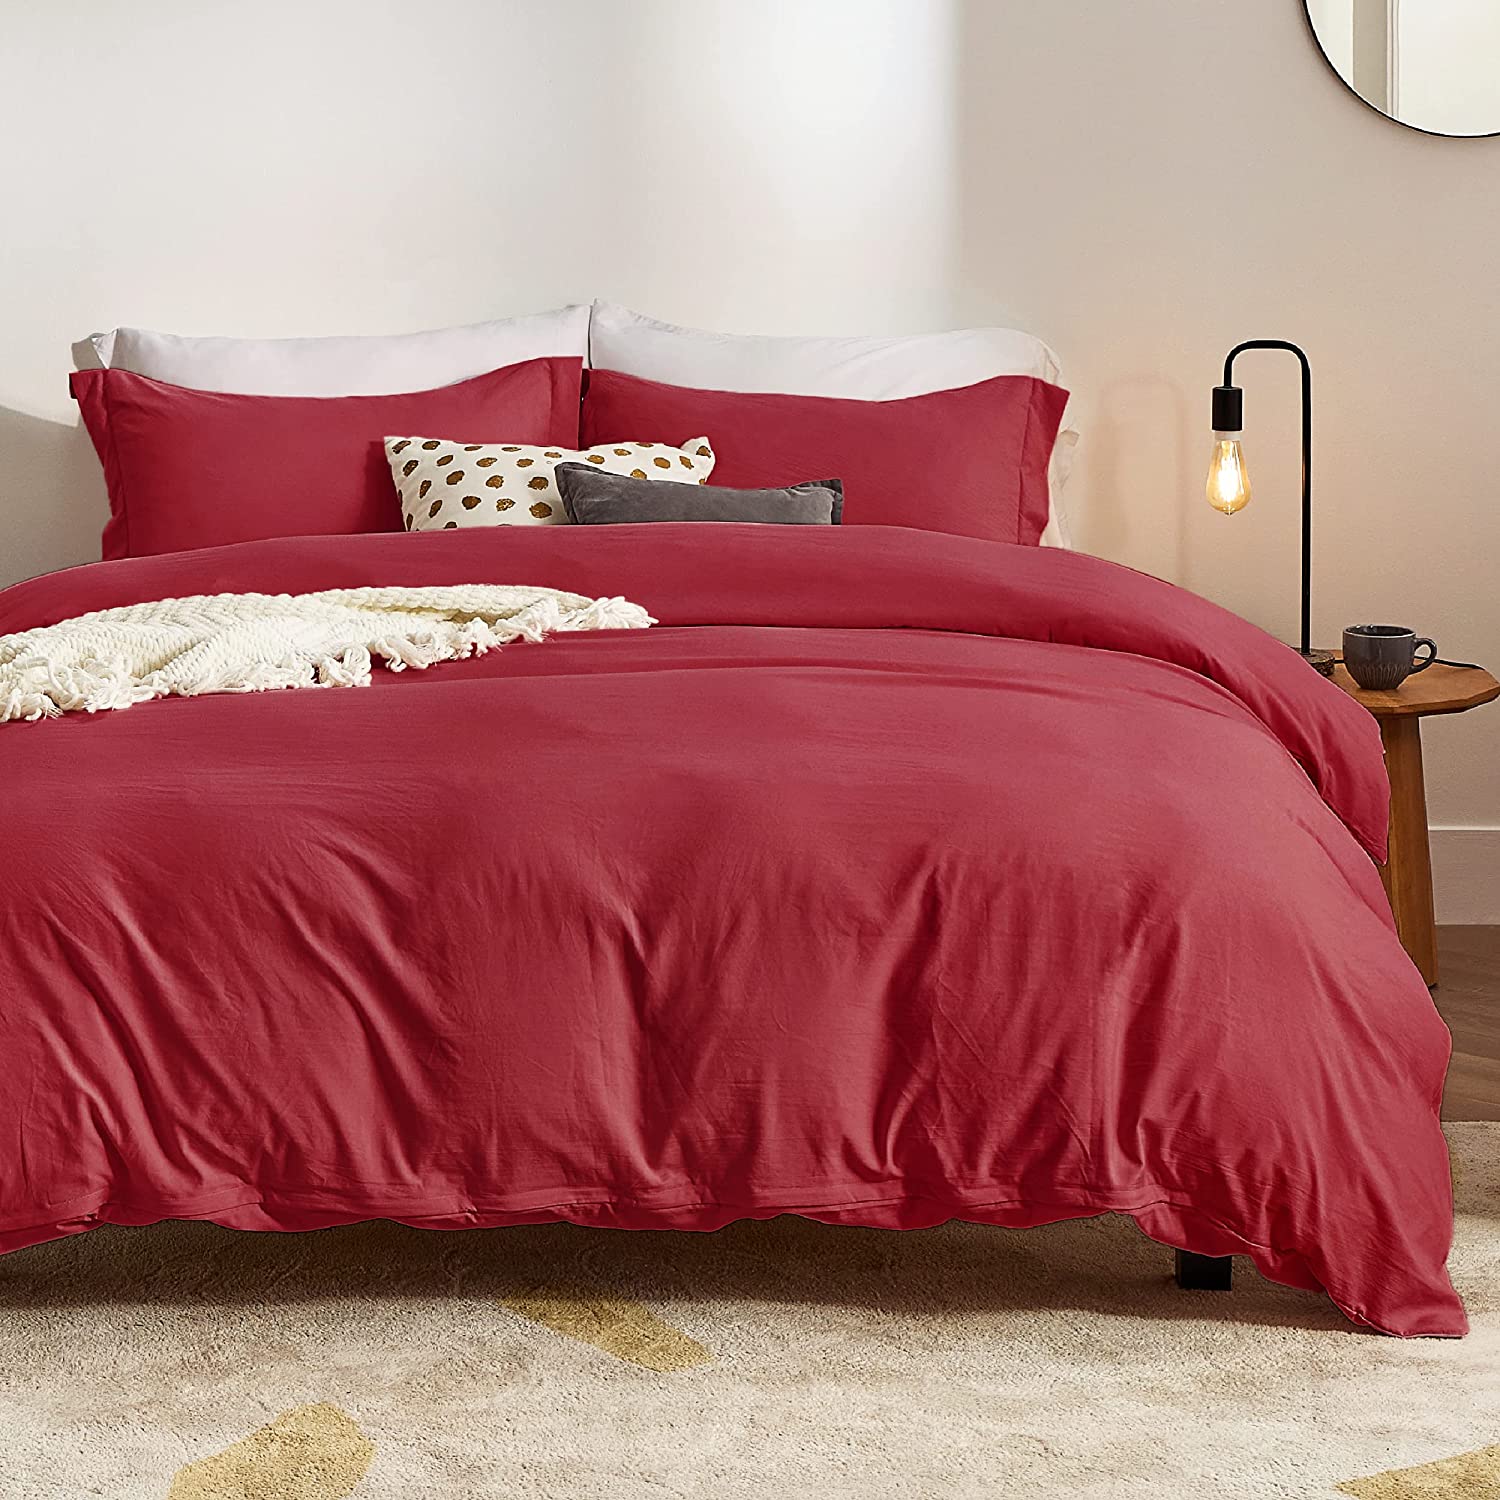 BEDSURE White Duvet Covers Queen Size - Washed Duvet Cover, Soft